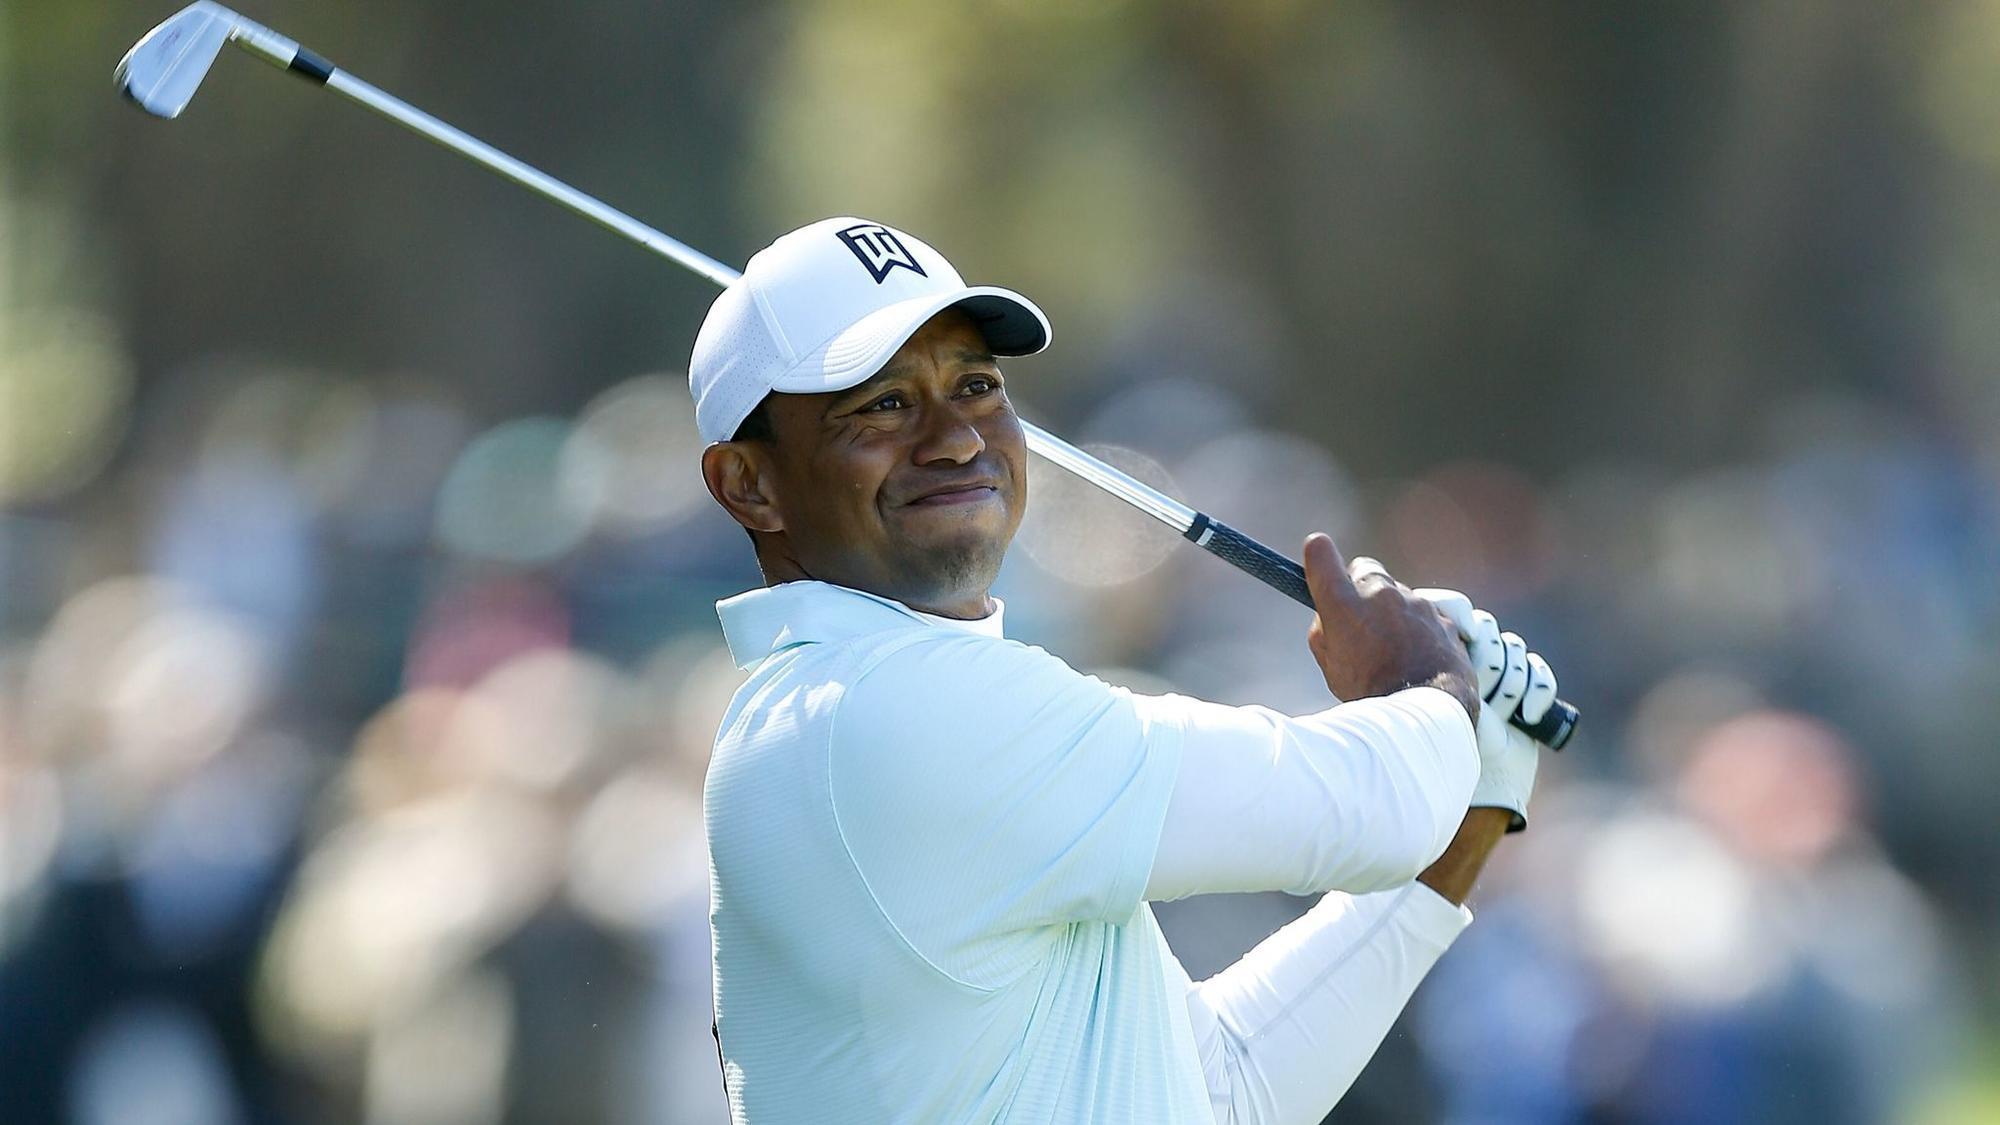 Tiger Woods surges to the top of a PGA Tour leaderboard for the first time since 2015 ...